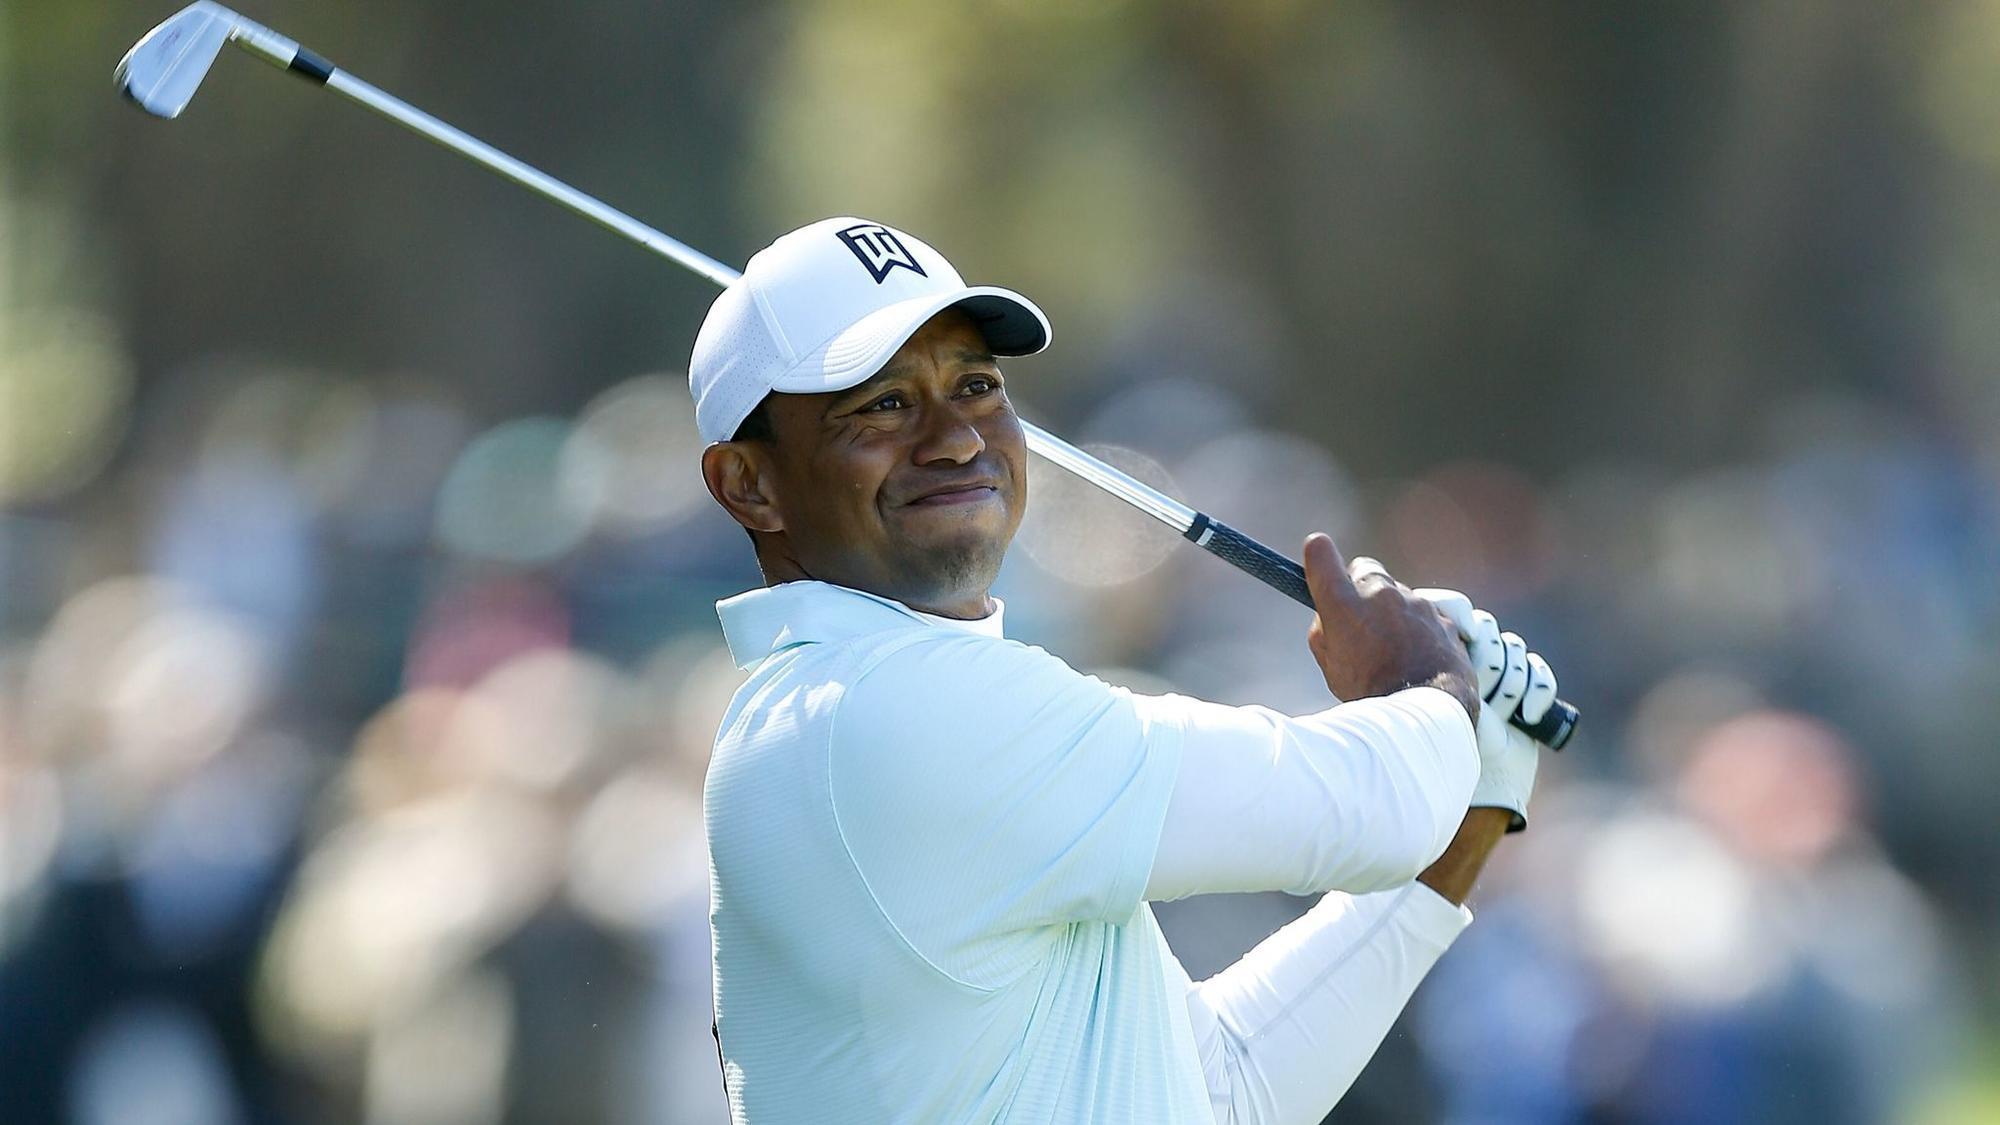 Tiger Woods surges to the top of a PGA Tour leaderboard for the first time since 2015 ...